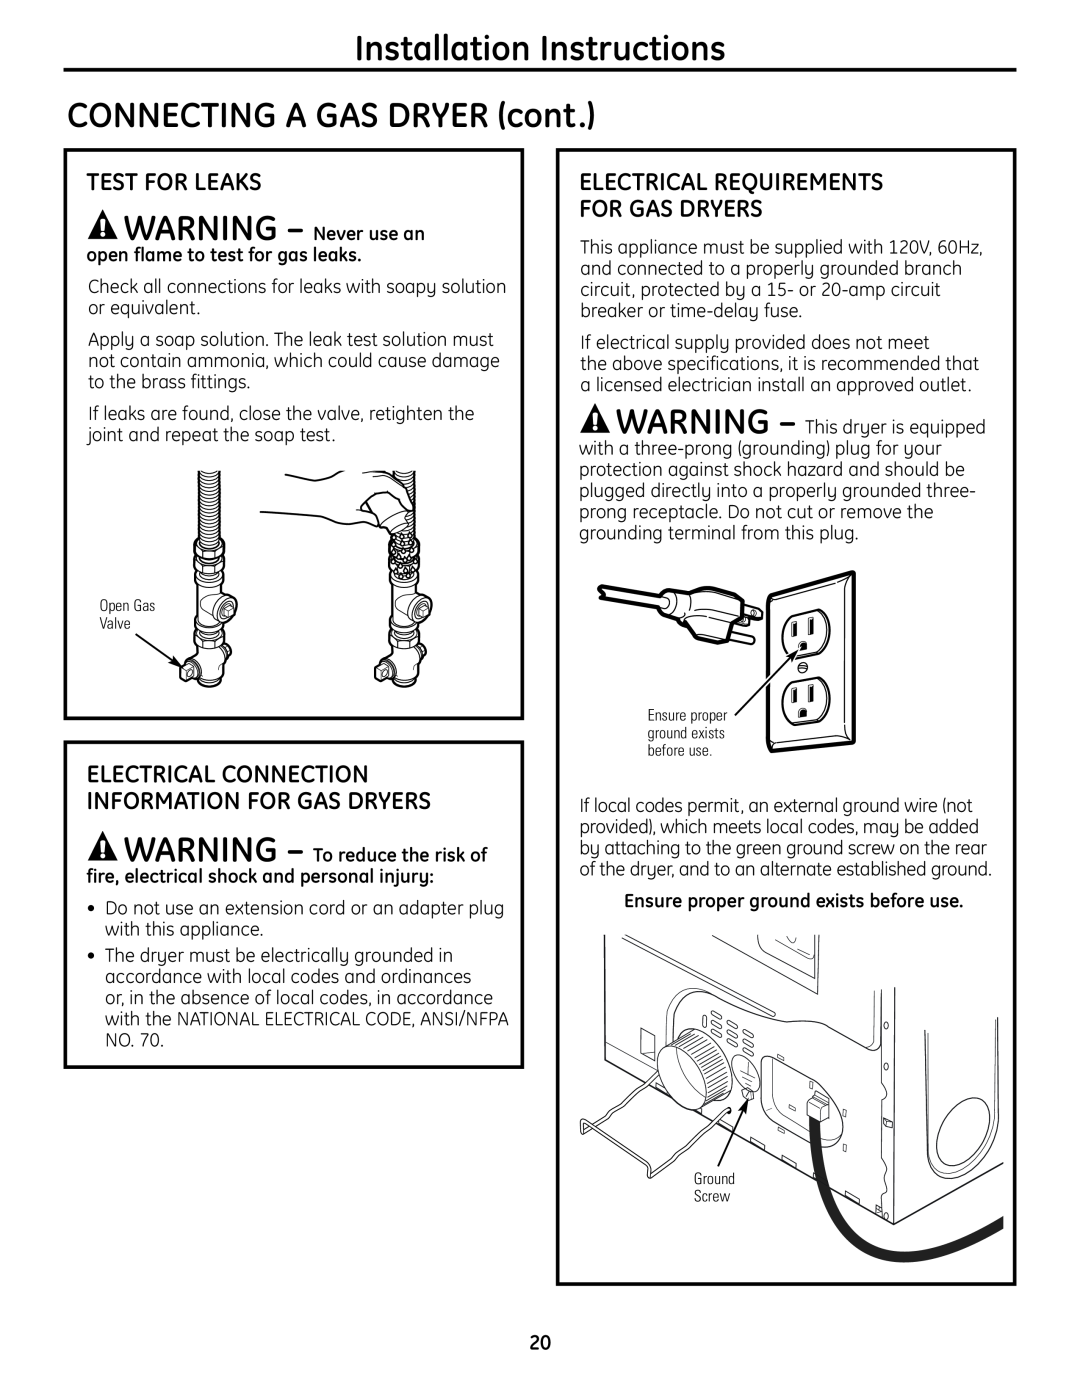 GE UPVH890 Test For Leaks, Electrical Requirements For Gas Dryers, Installation Instructions CONNECTING A GAS DRYER cont 